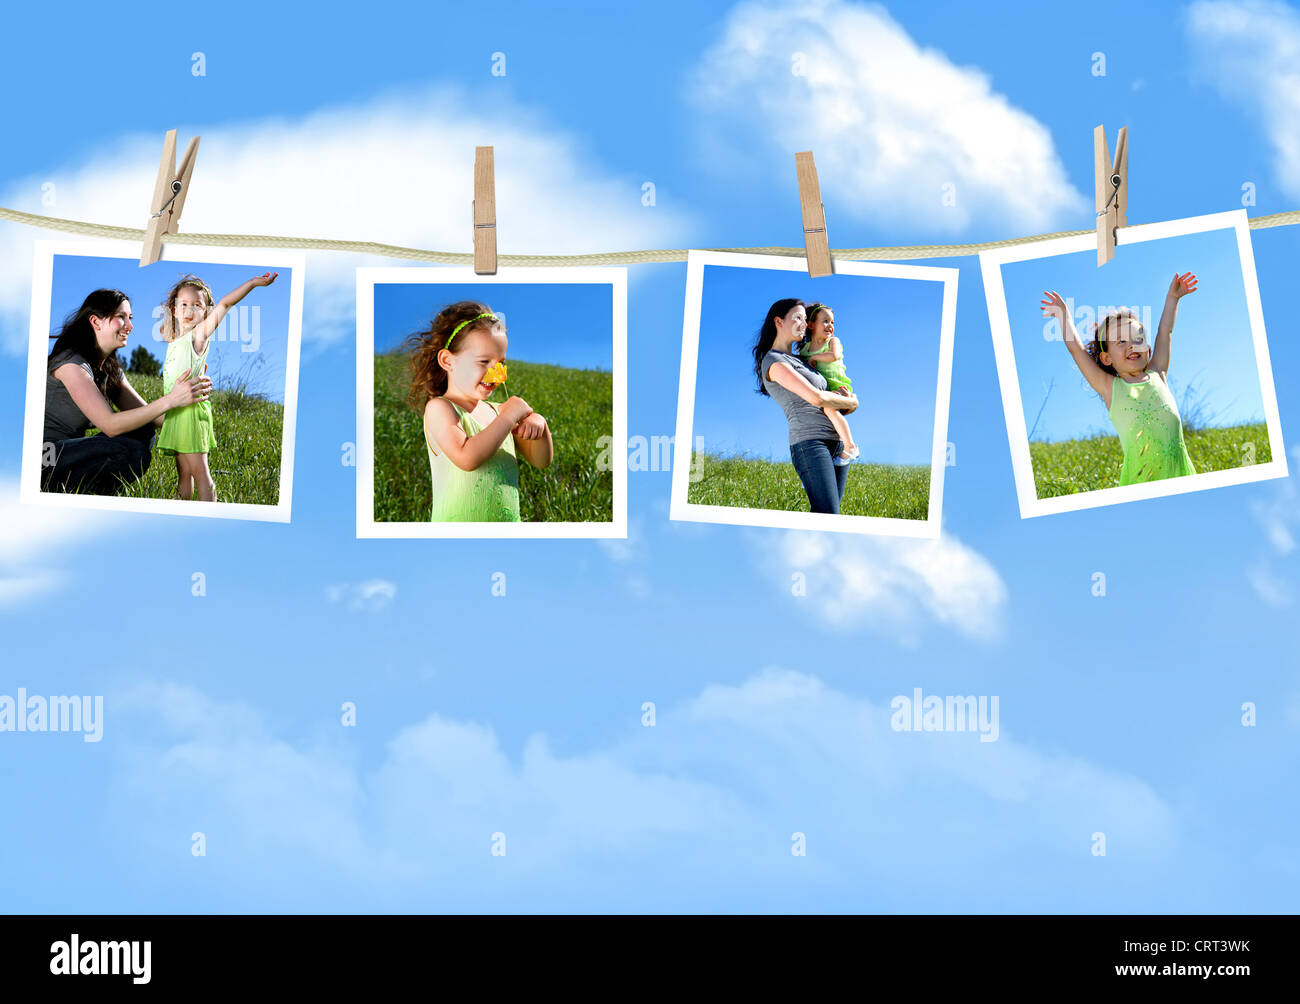 Family photographs hanging on a clothesline against a blue sky Stock Photo